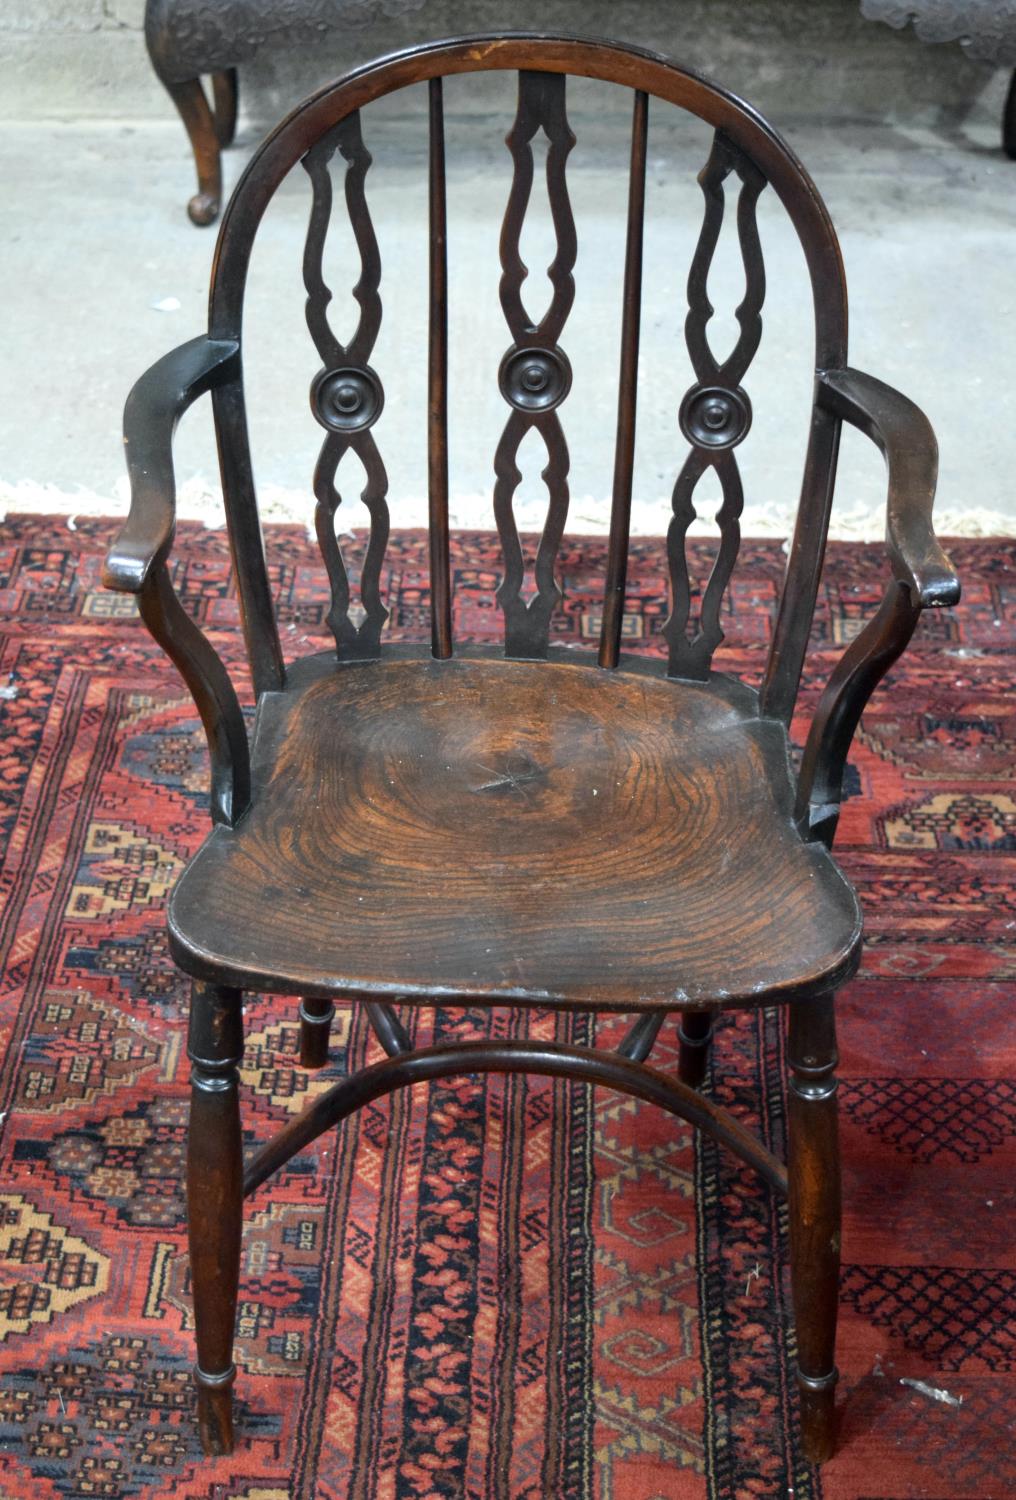 AN 18TH CENTURY DRAUGHT-BACK OAK COUNTRY CHAIR beautifully decorated with three draught counters car